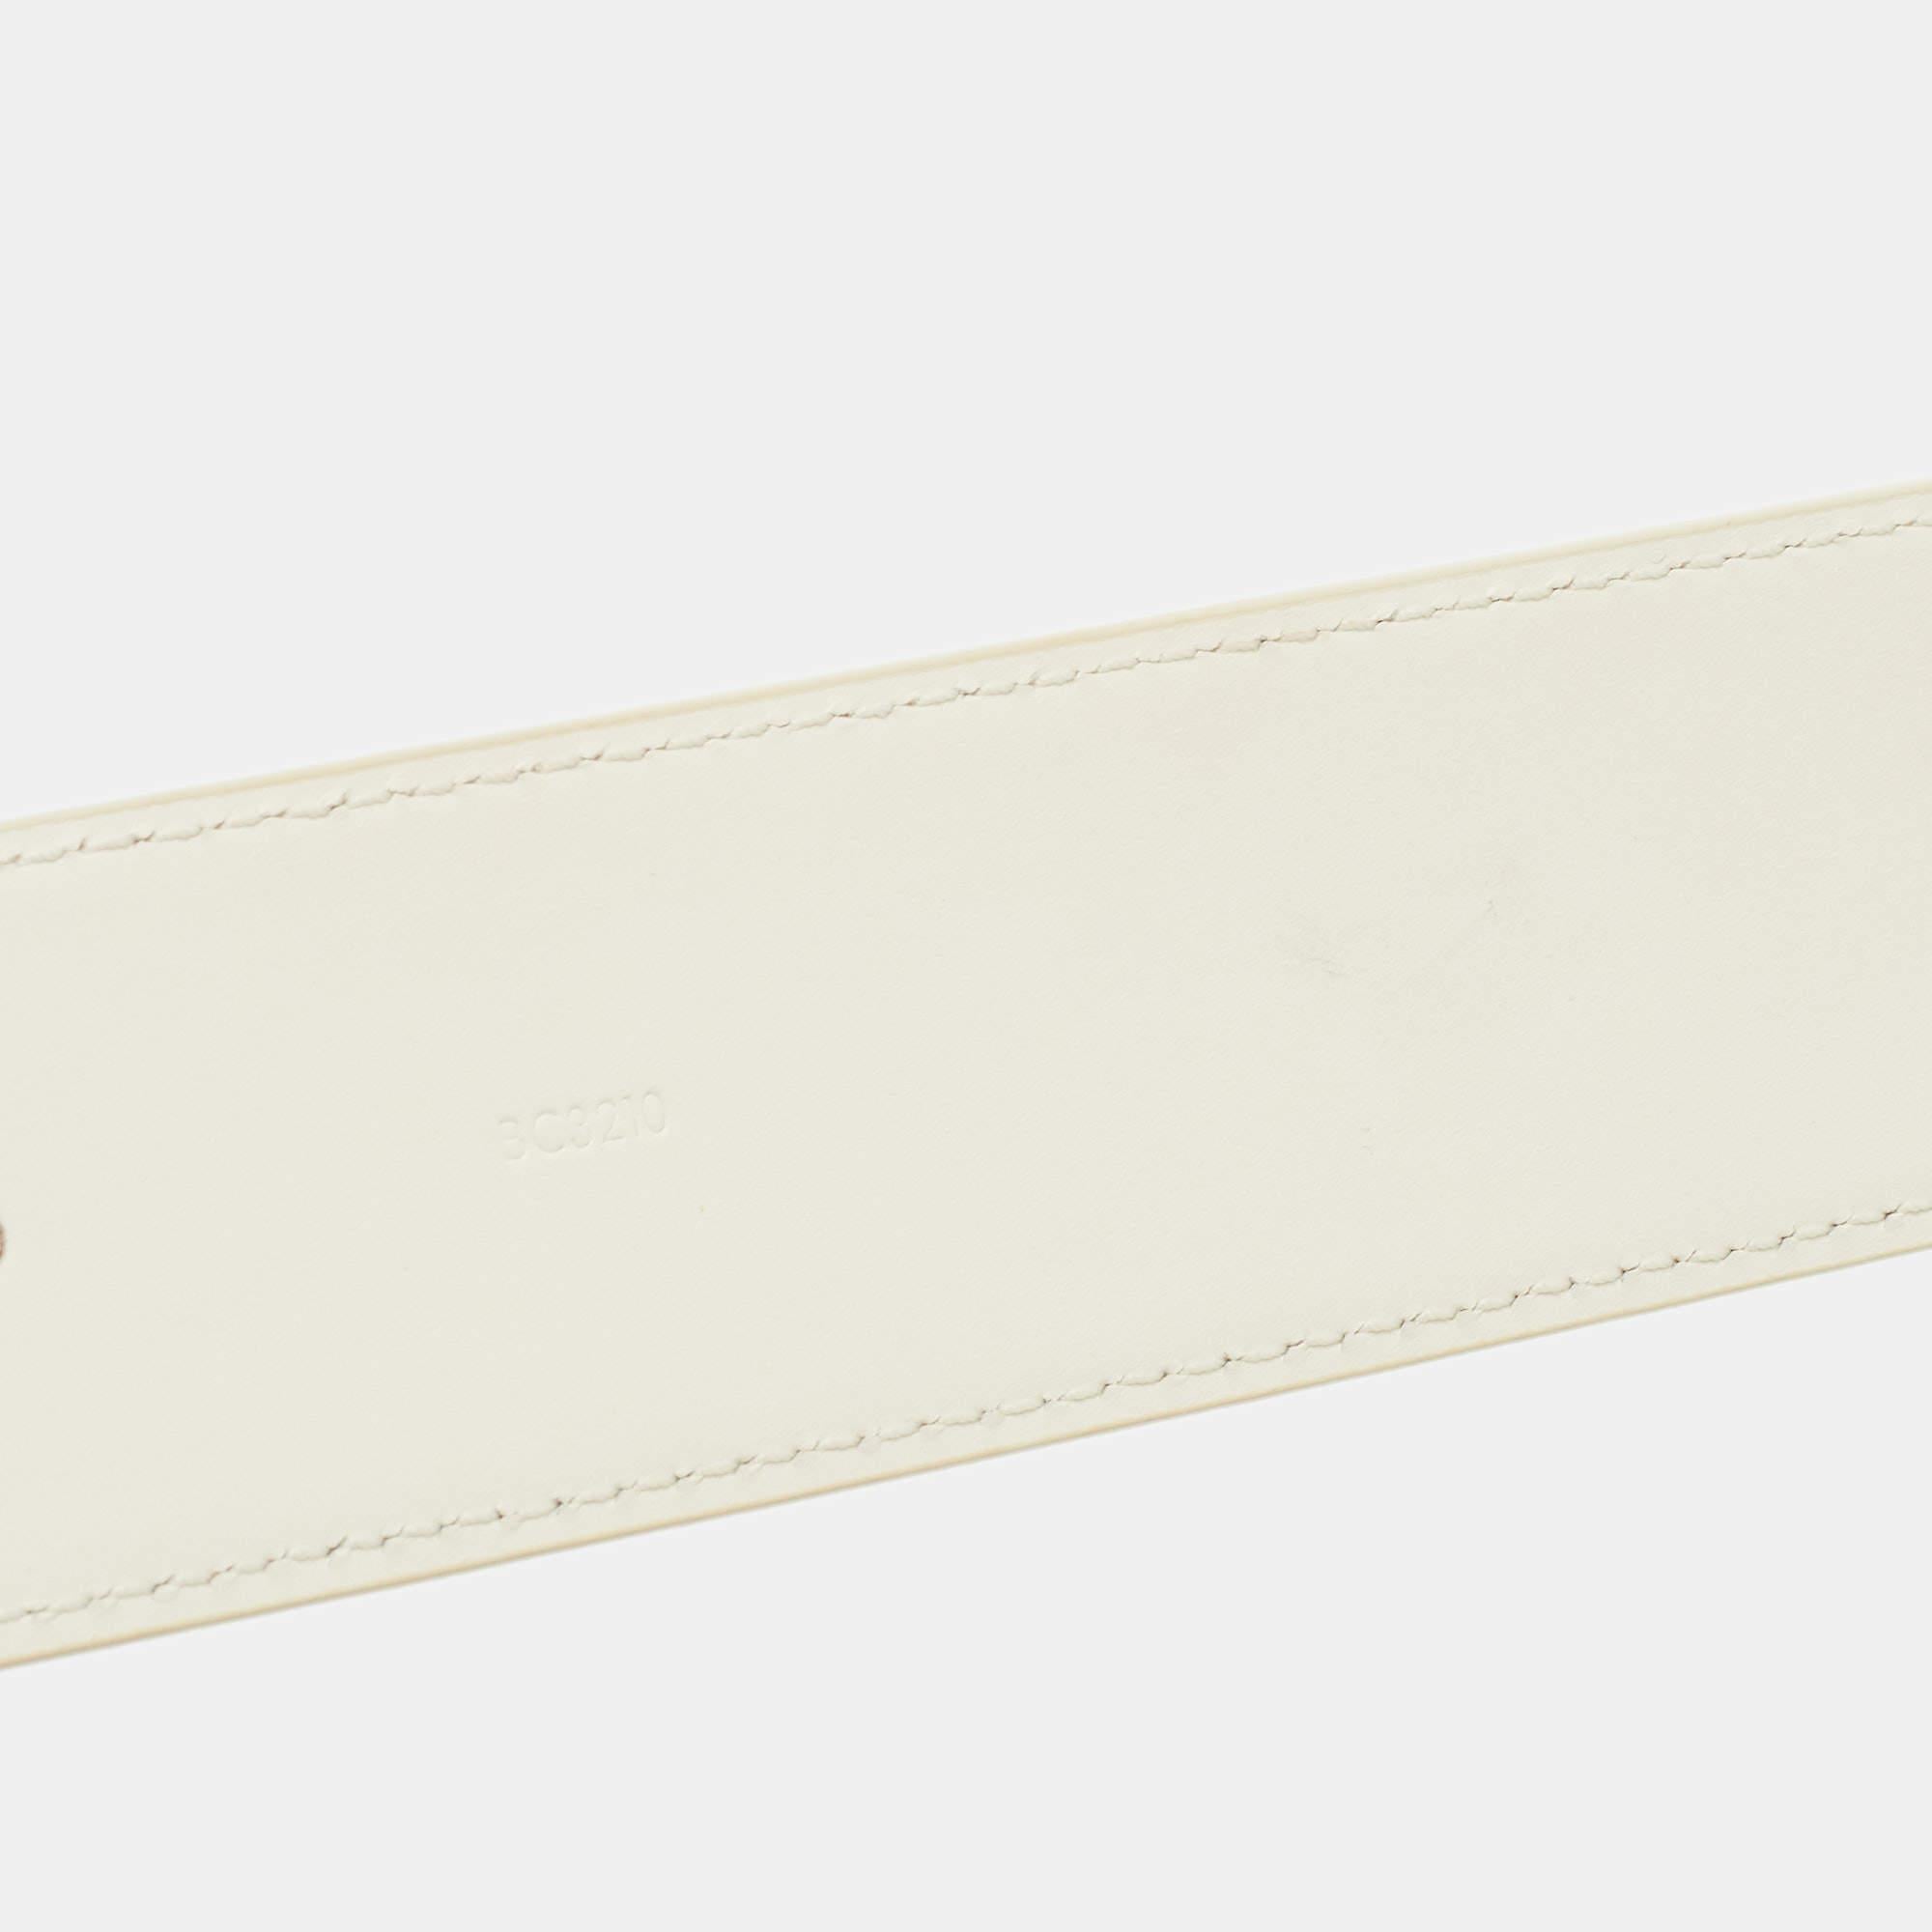 Presenting a designer belt that has been crafted to be durable and to suit all your refined looks. High in durability and appeal, this belt is a fine element of luxury.

Includes: Original Dustbag, Original Box